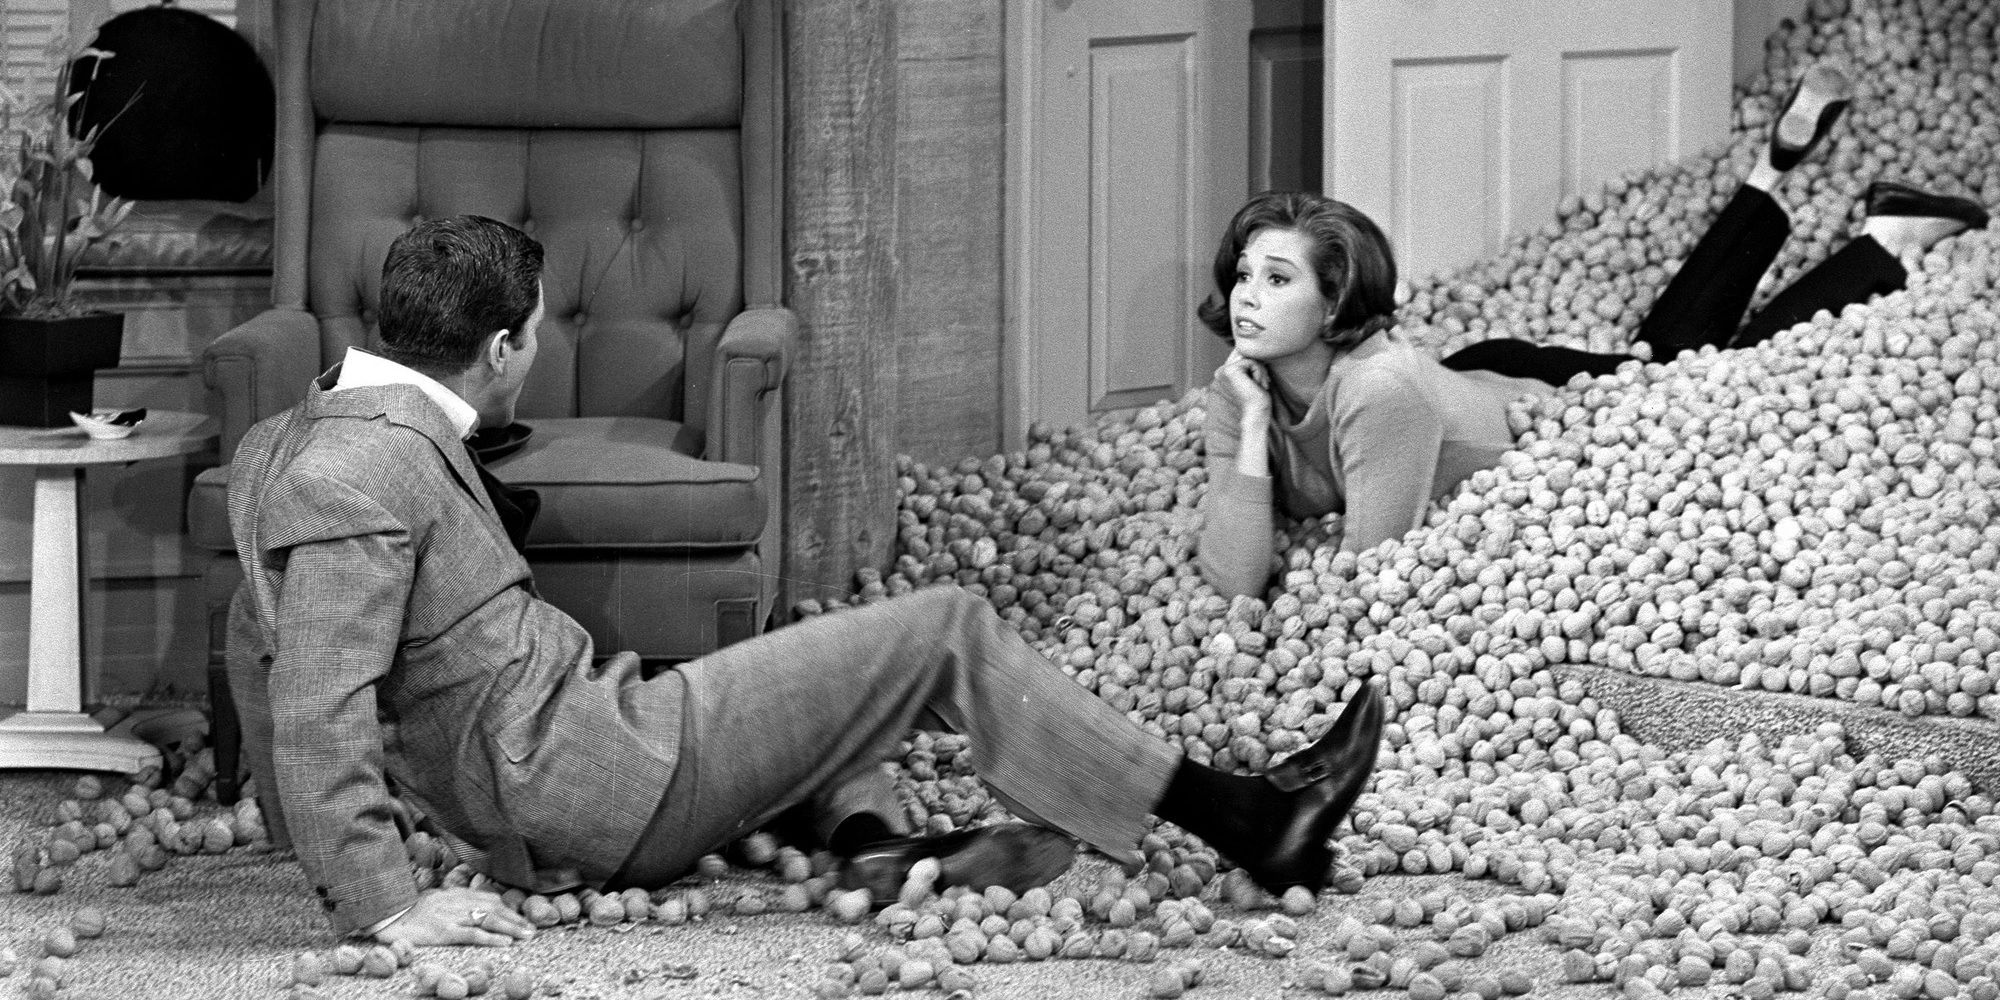 Rob and Laura with a ton of walnuts in The Dick Van Dyke Show